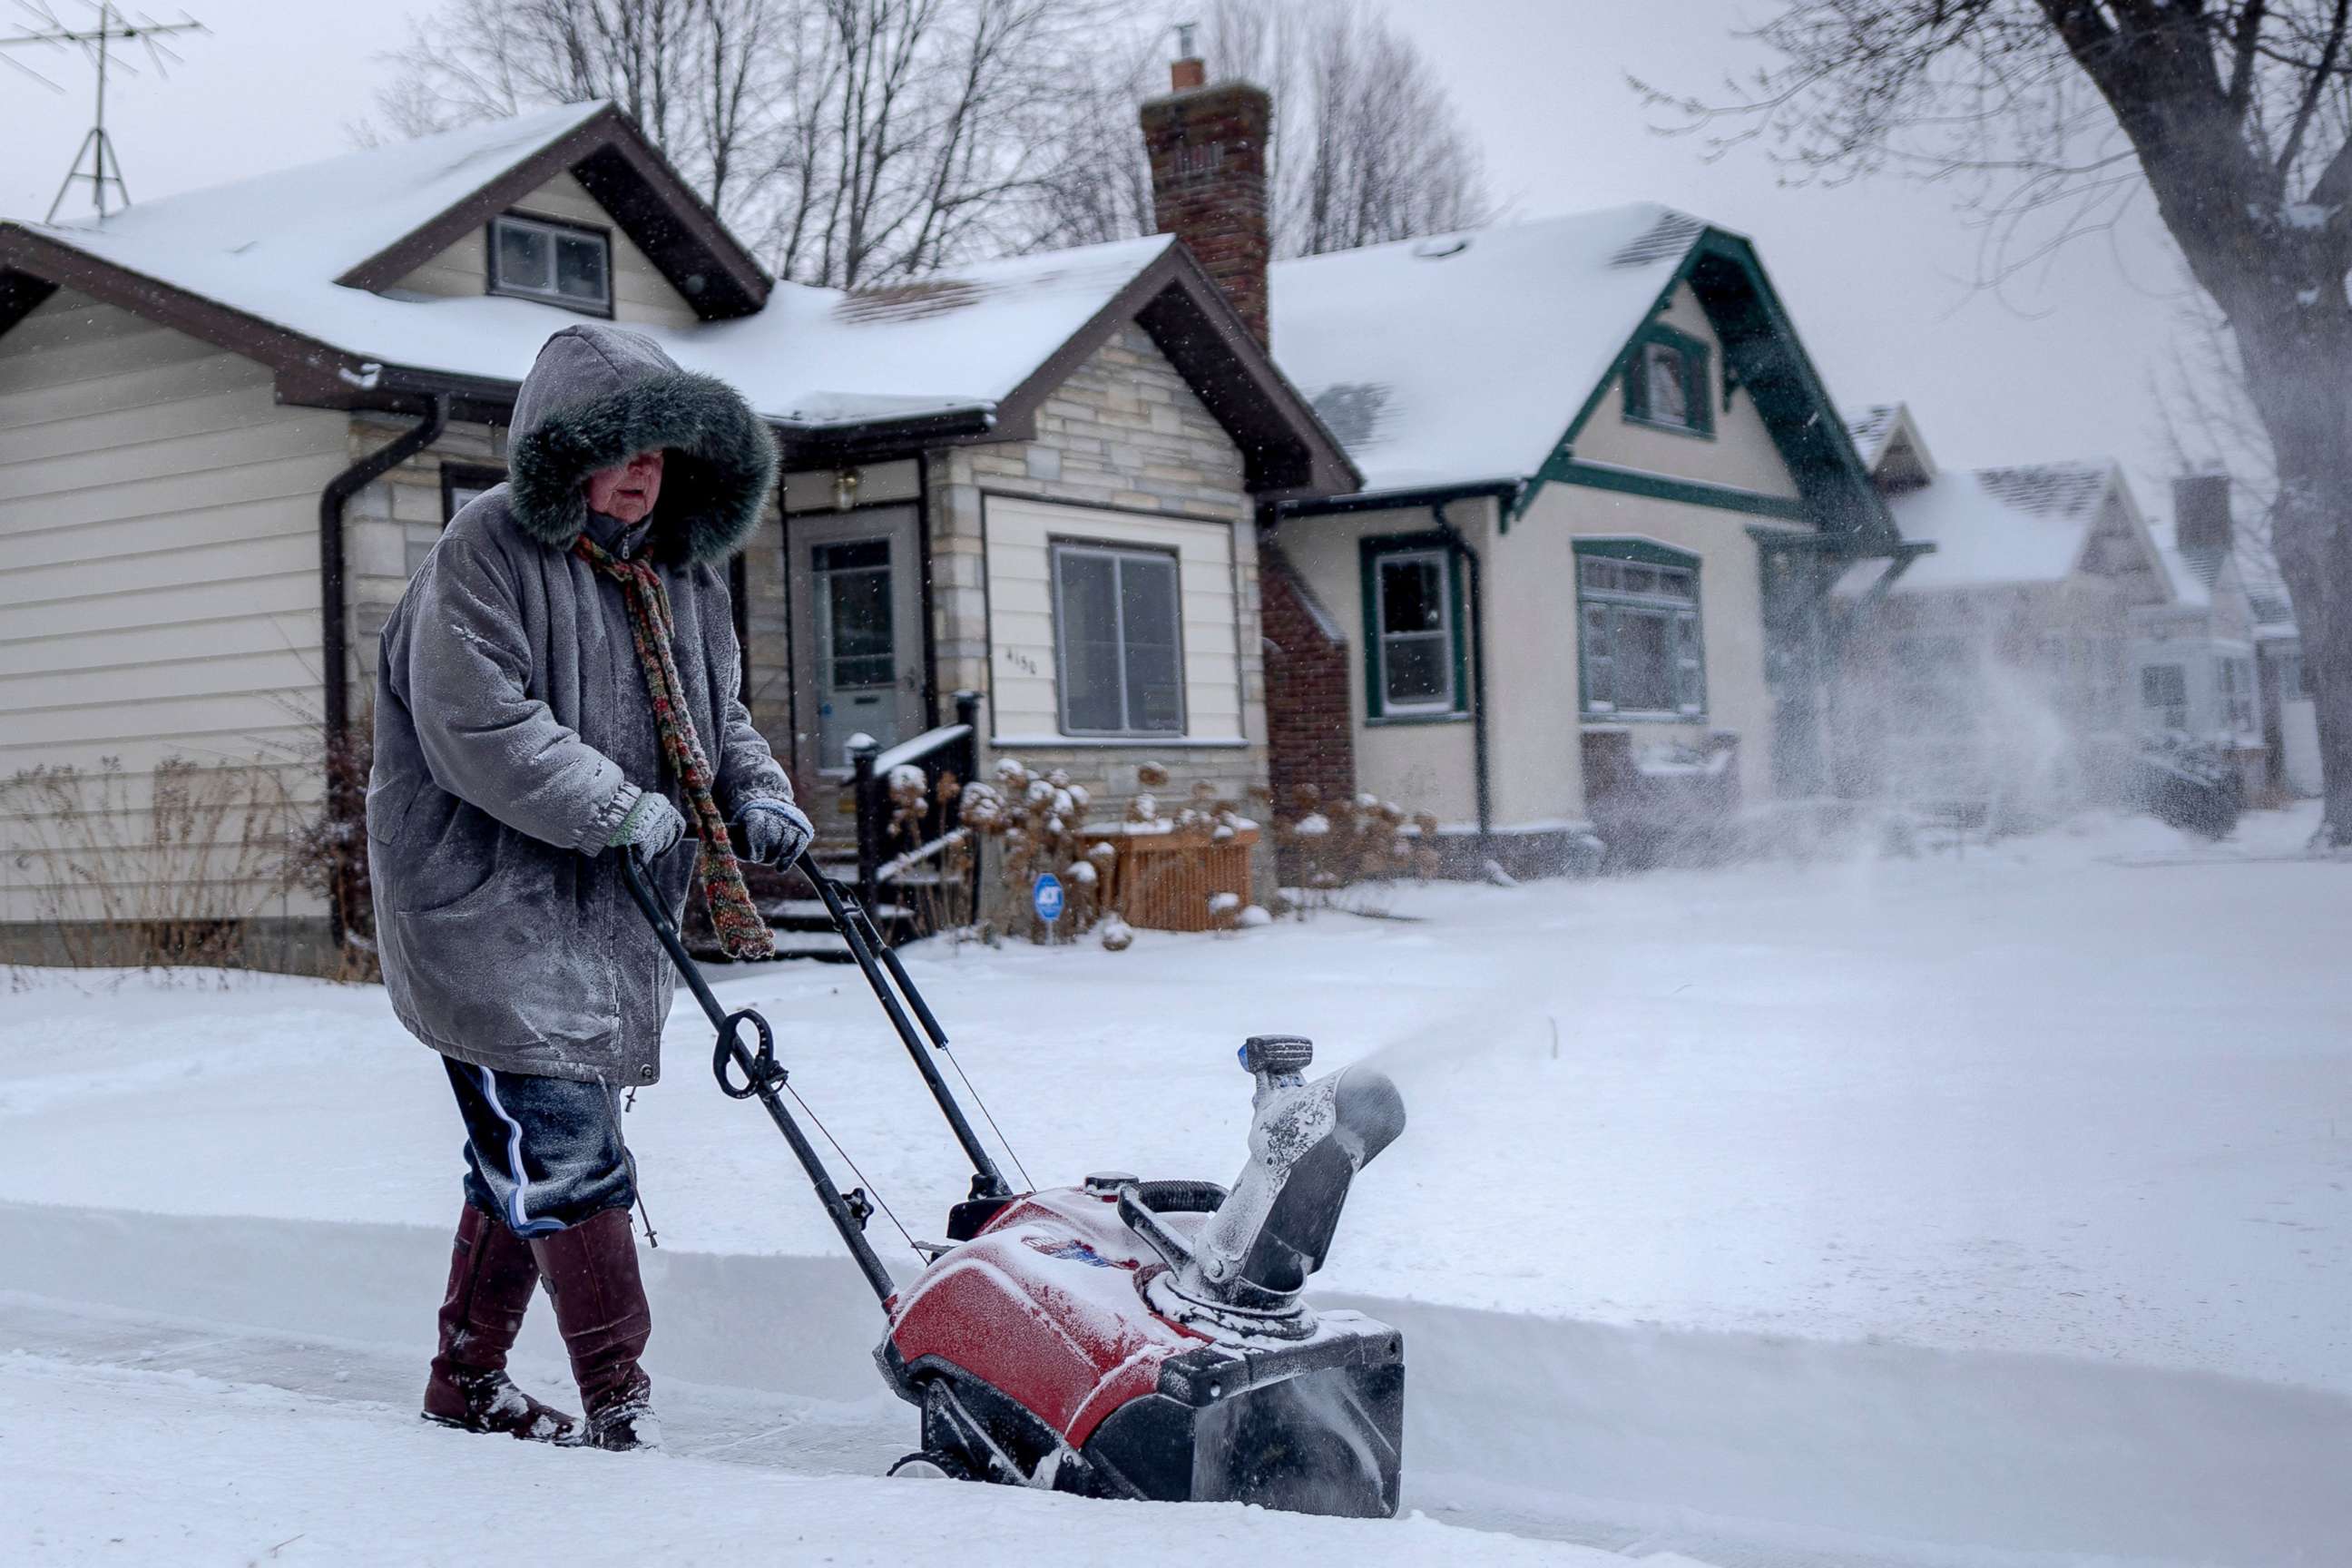 PHOTO: A woman uses a snowblower to clear the sidewalk during a heavy snowstorm in St. Paul, Minn., Feb. 22, 2022.